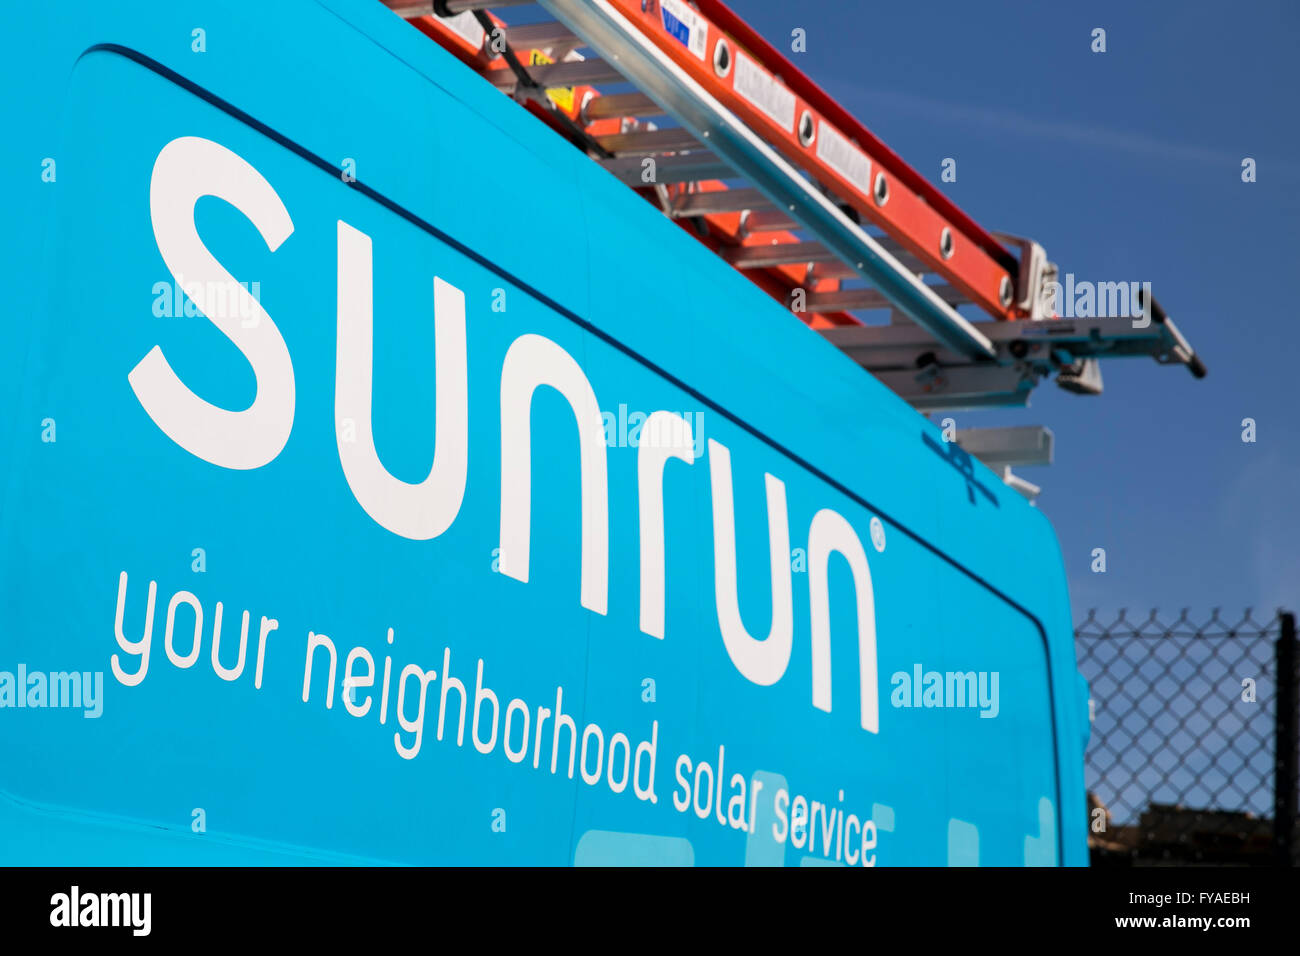 Work vans featuring logos of the solar provider Sunrun Inc., in Linthicum Heights, Maryland on April 10, 2016. Stock Photo